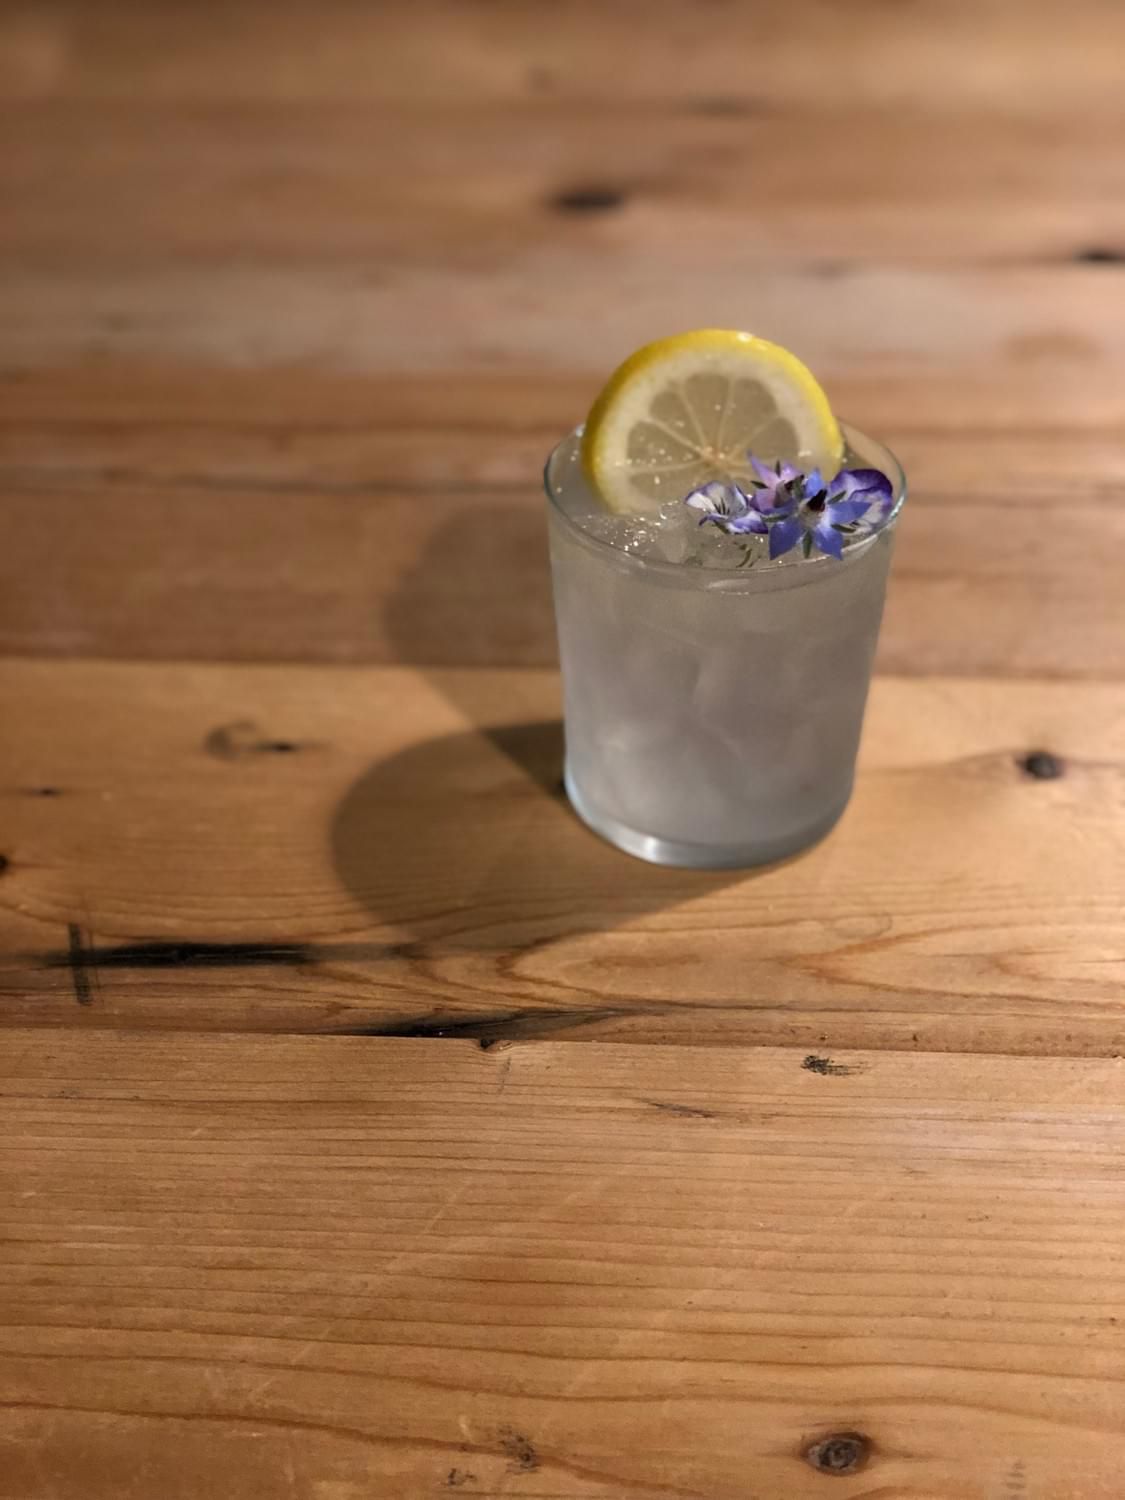 A clear highball glass filled with pale, clear liquid and adorned with a purple flower and lemon slice sits atop a light wood surface